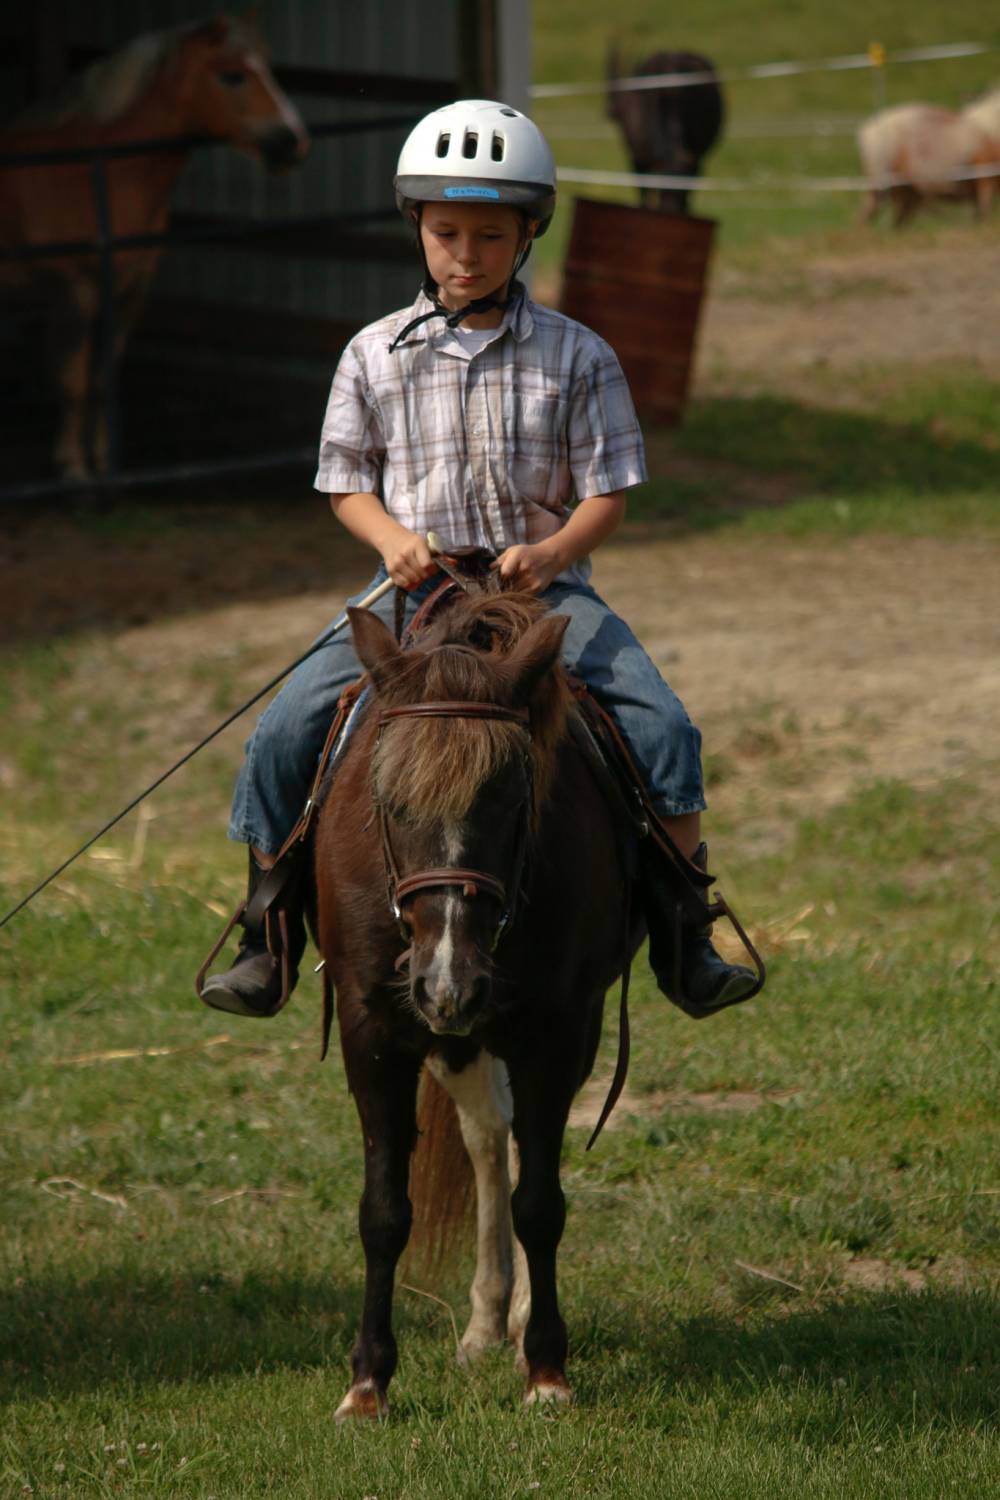 TOP PENNSYLVANIA EQUESTRIAN CAMP: Fairview Farm and Guest Ranch - Rough Riders Girl s Camp is a Top Equestrian Summer Camp located in Granville Summit Pennsylvania offering many fun and enriching Equestrian and other camp programs. 